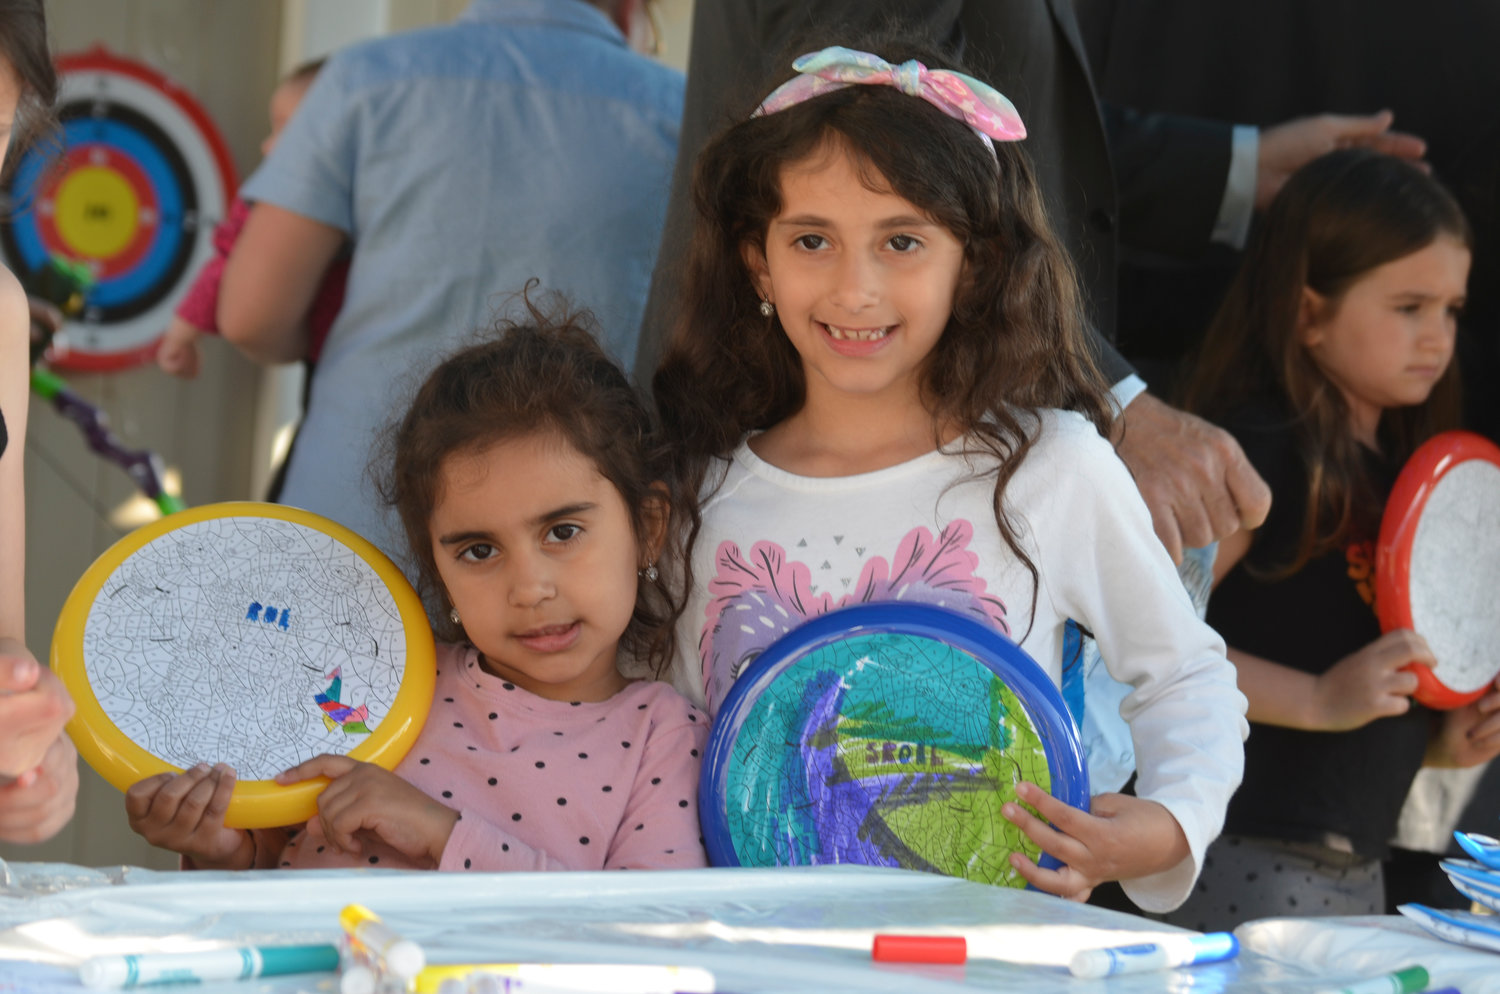 Liana and Abigail Niyazov, ages 5 and 7, had a great time at the barbecue.